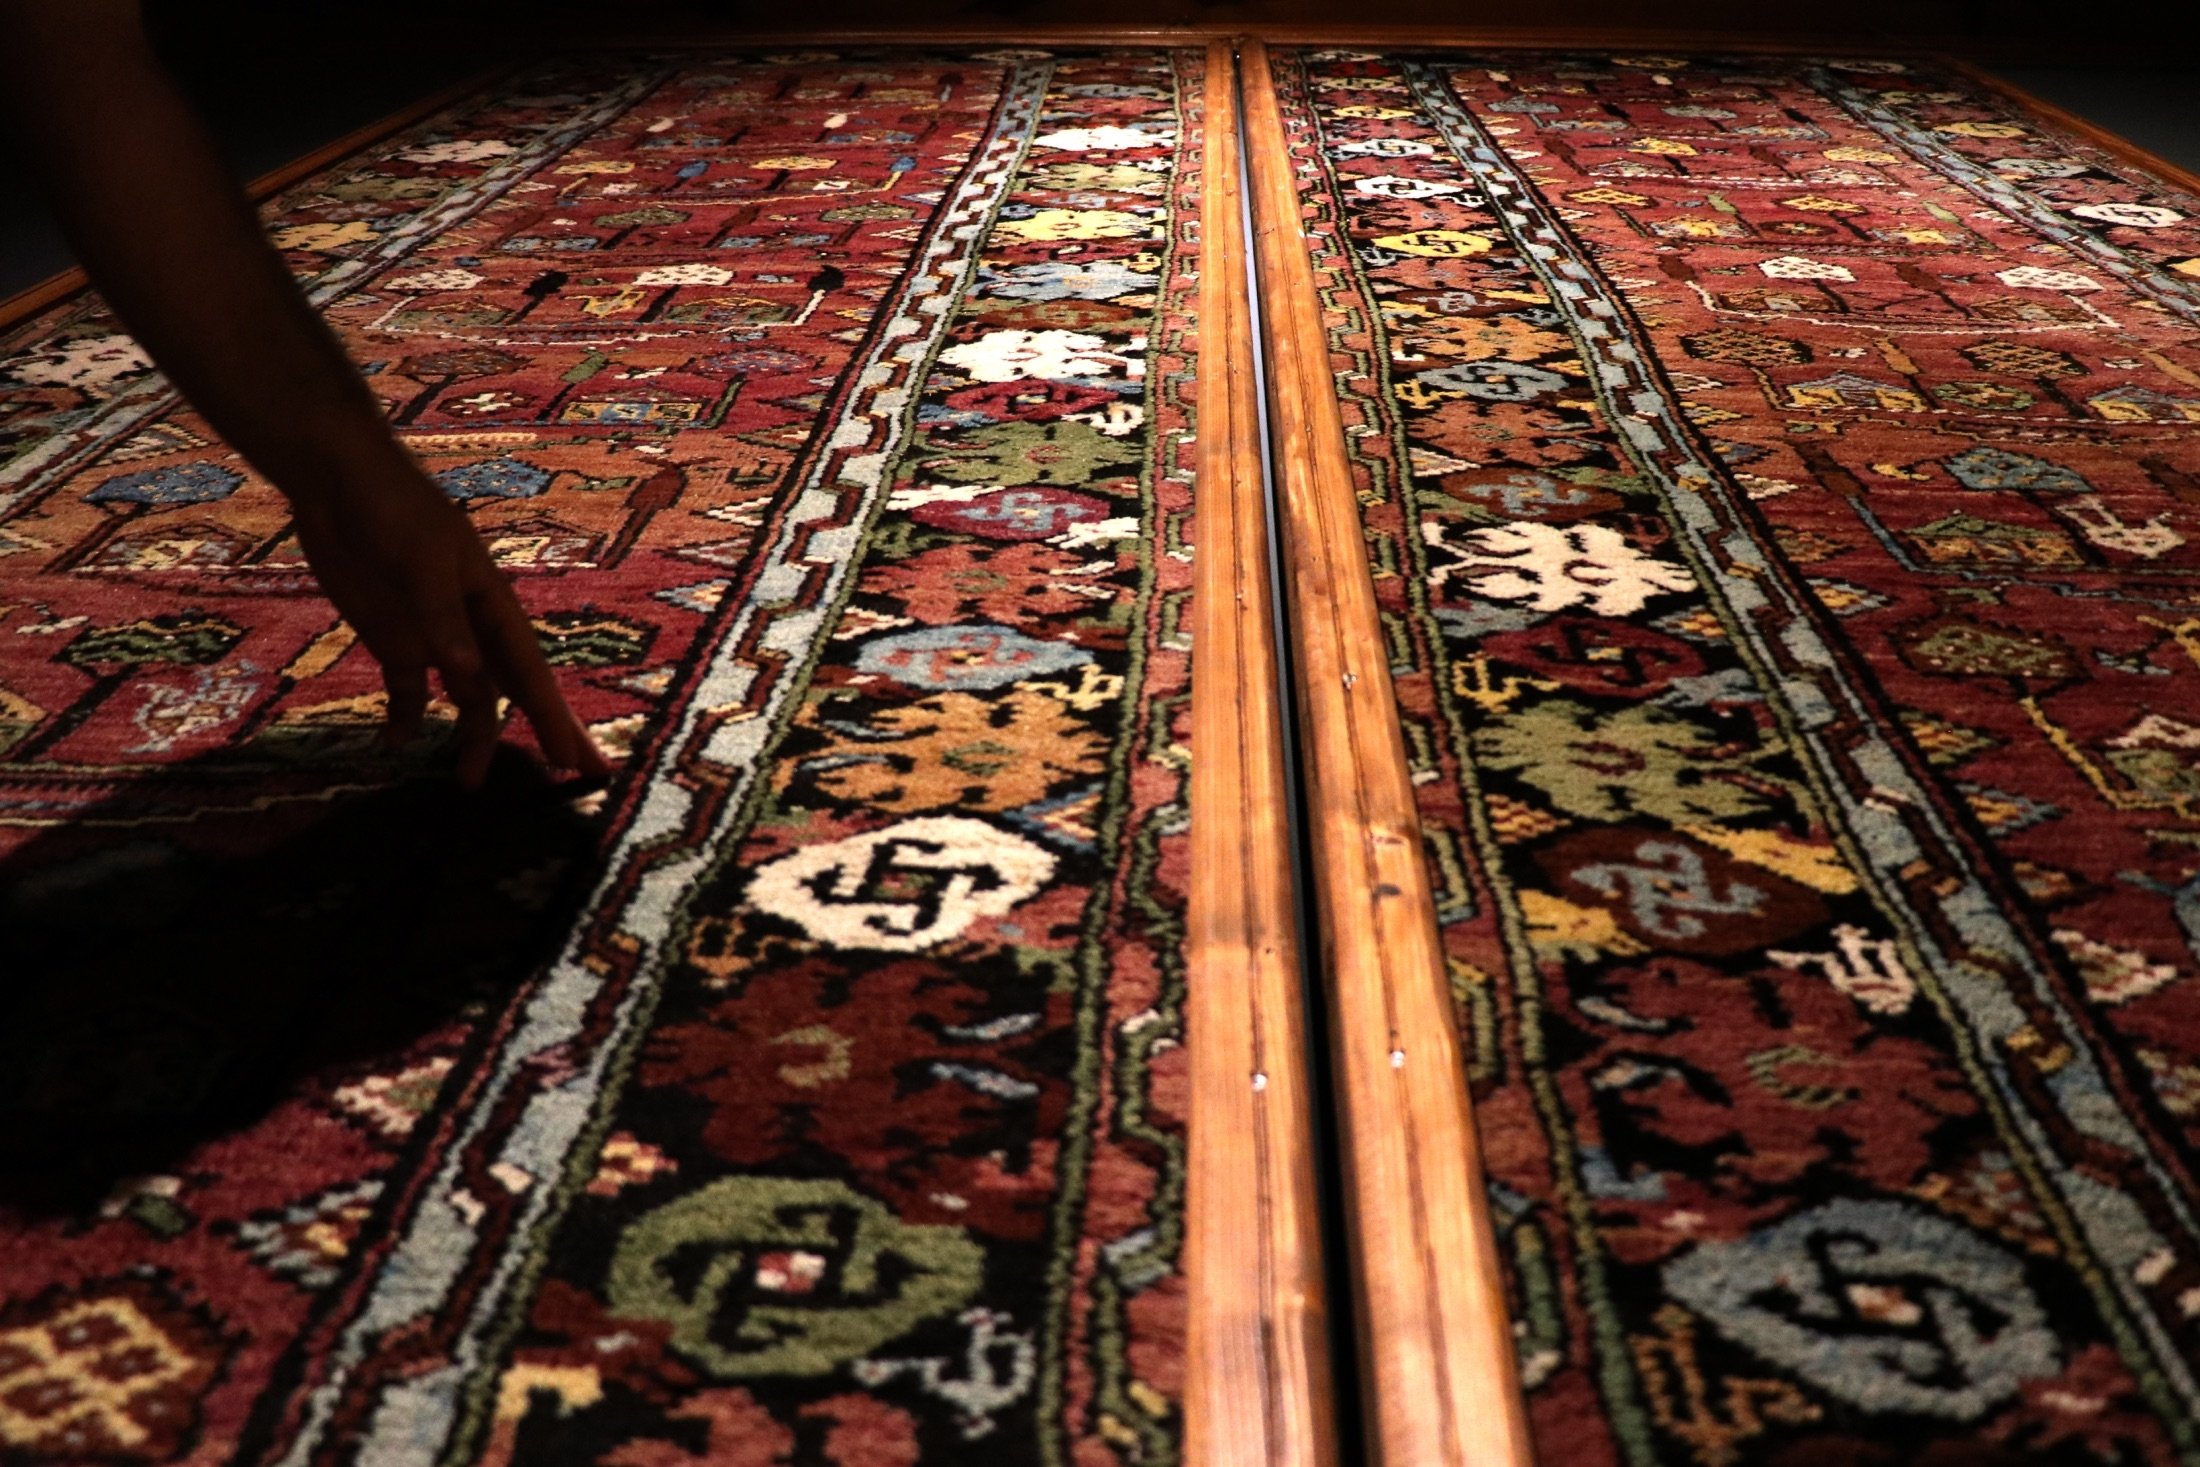 A person touches a historical 100-year-old carpet as it is displayed in the Sille Museum in the Sille district of Konya, Turkey, Aug. 11, 2021. (AA Photo)